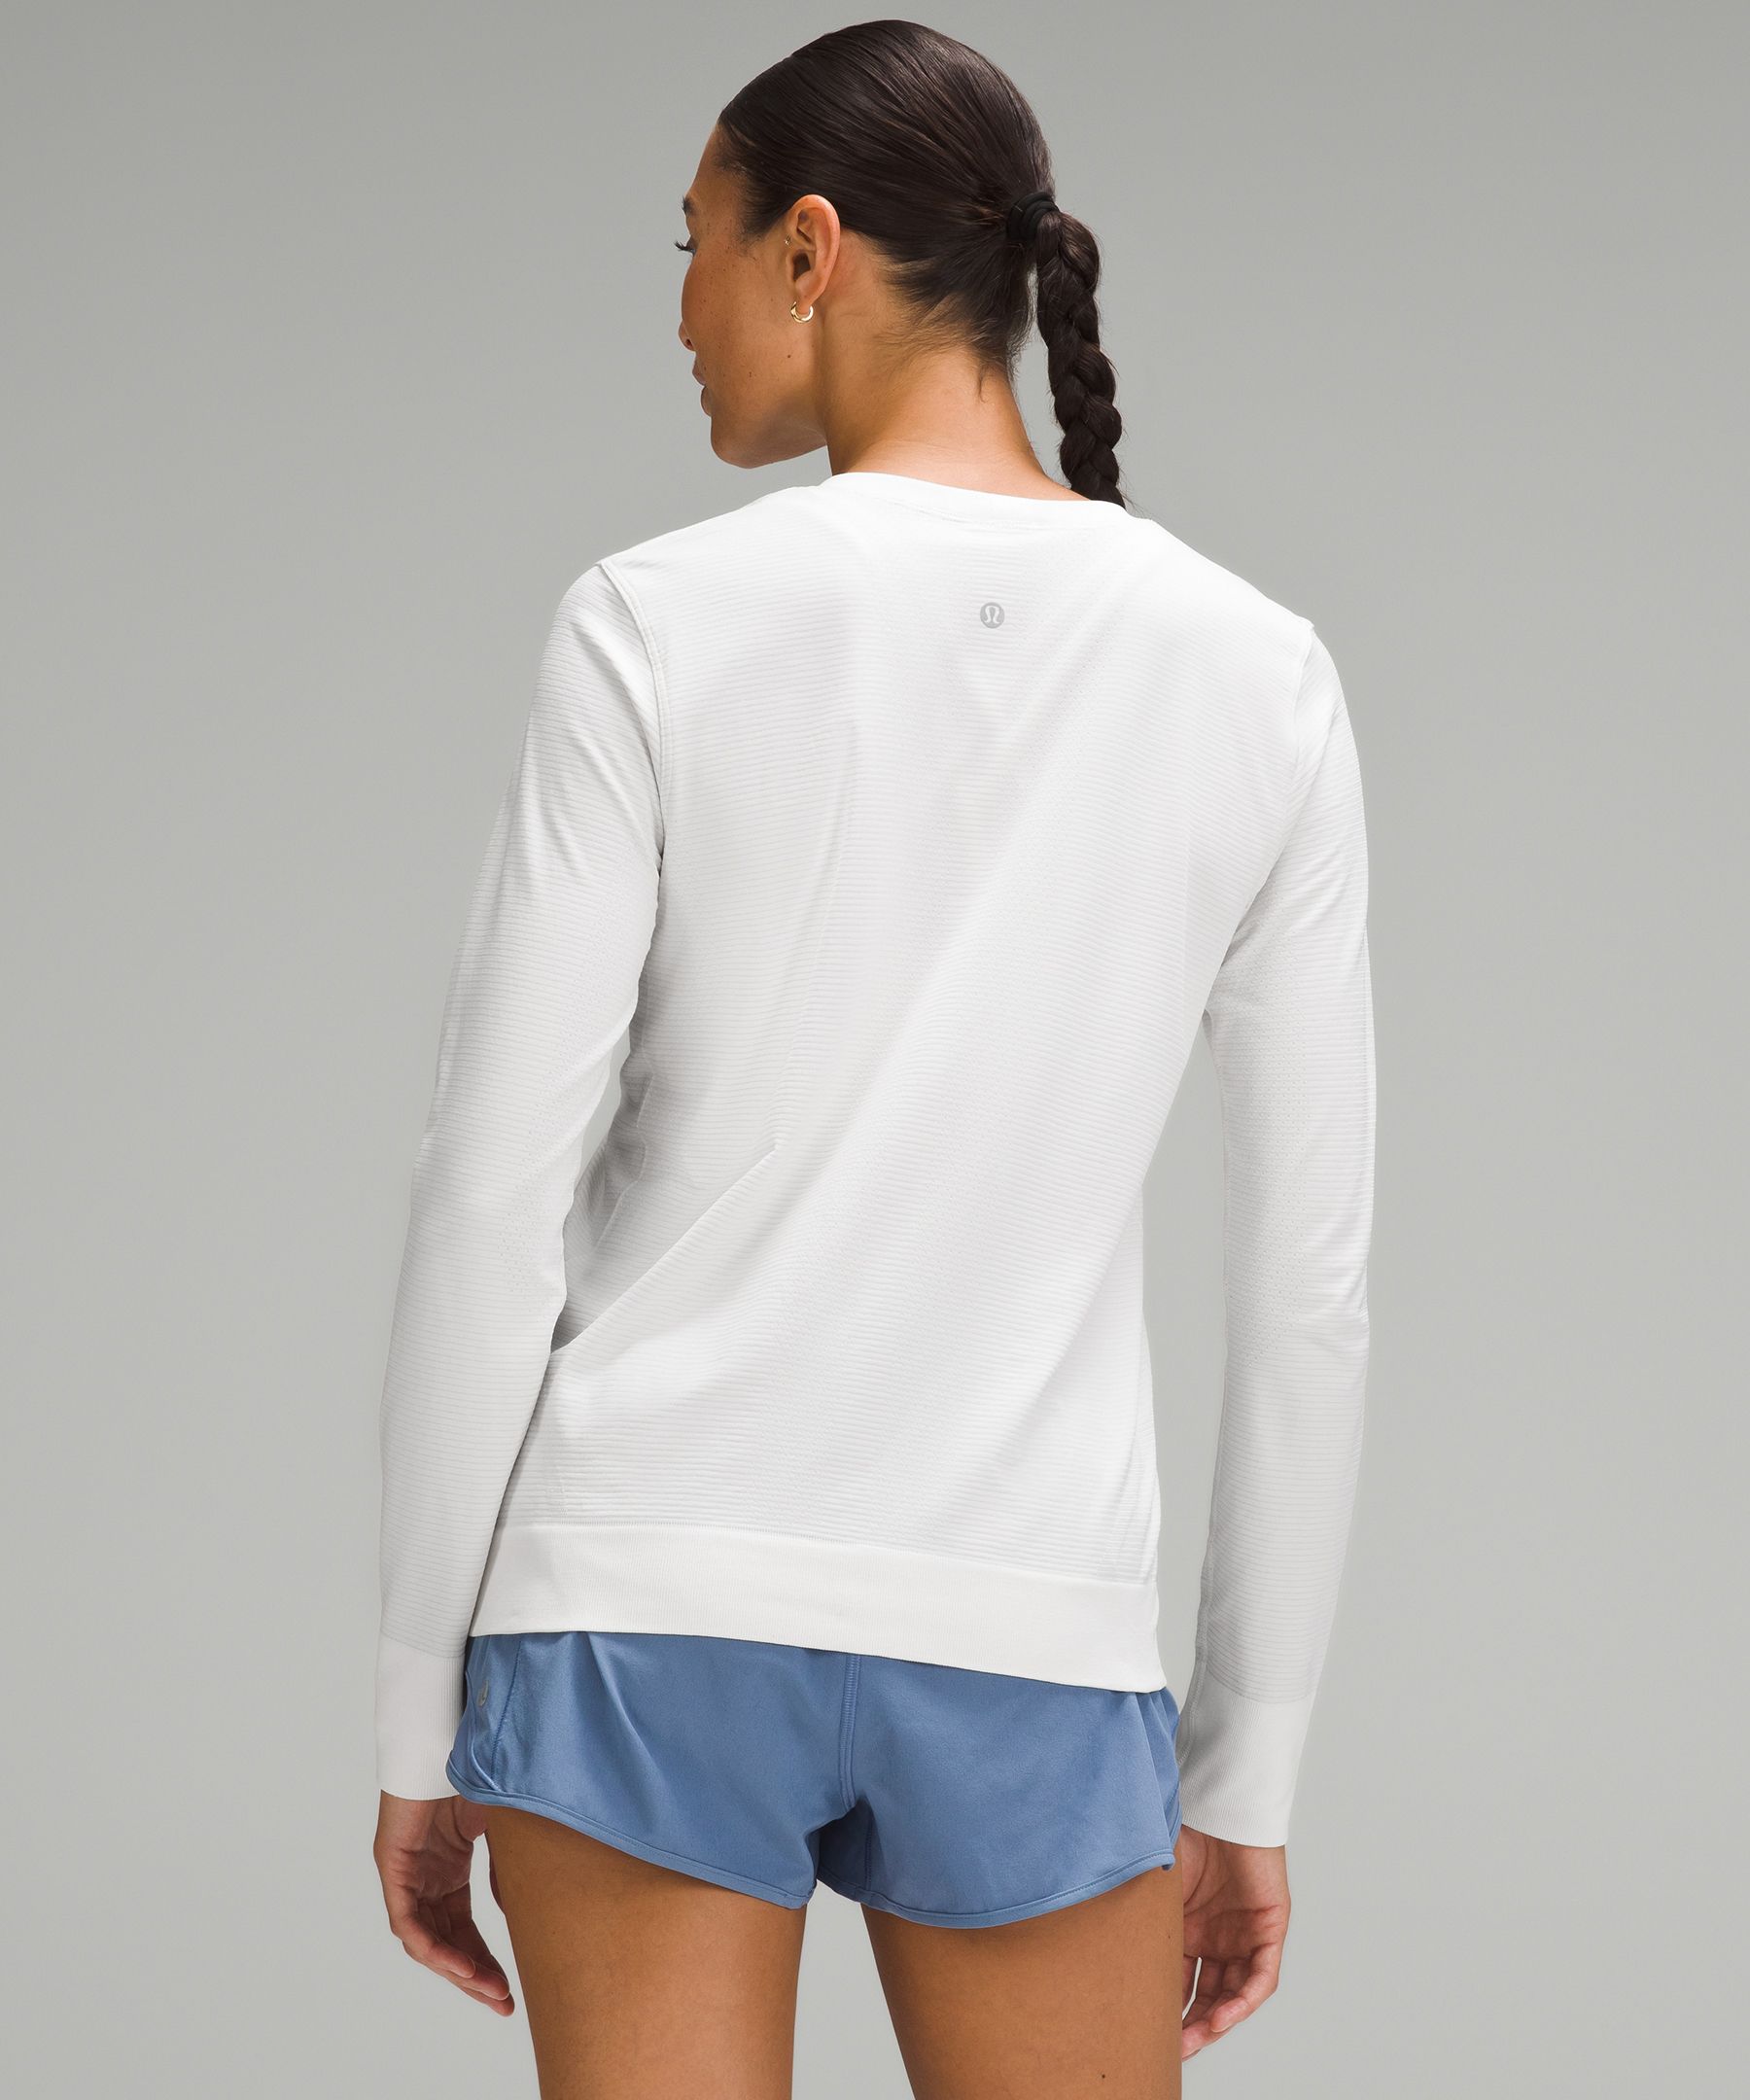 lululemon athletica Swiftly Relaxed Long-sleeve Shirt in Red